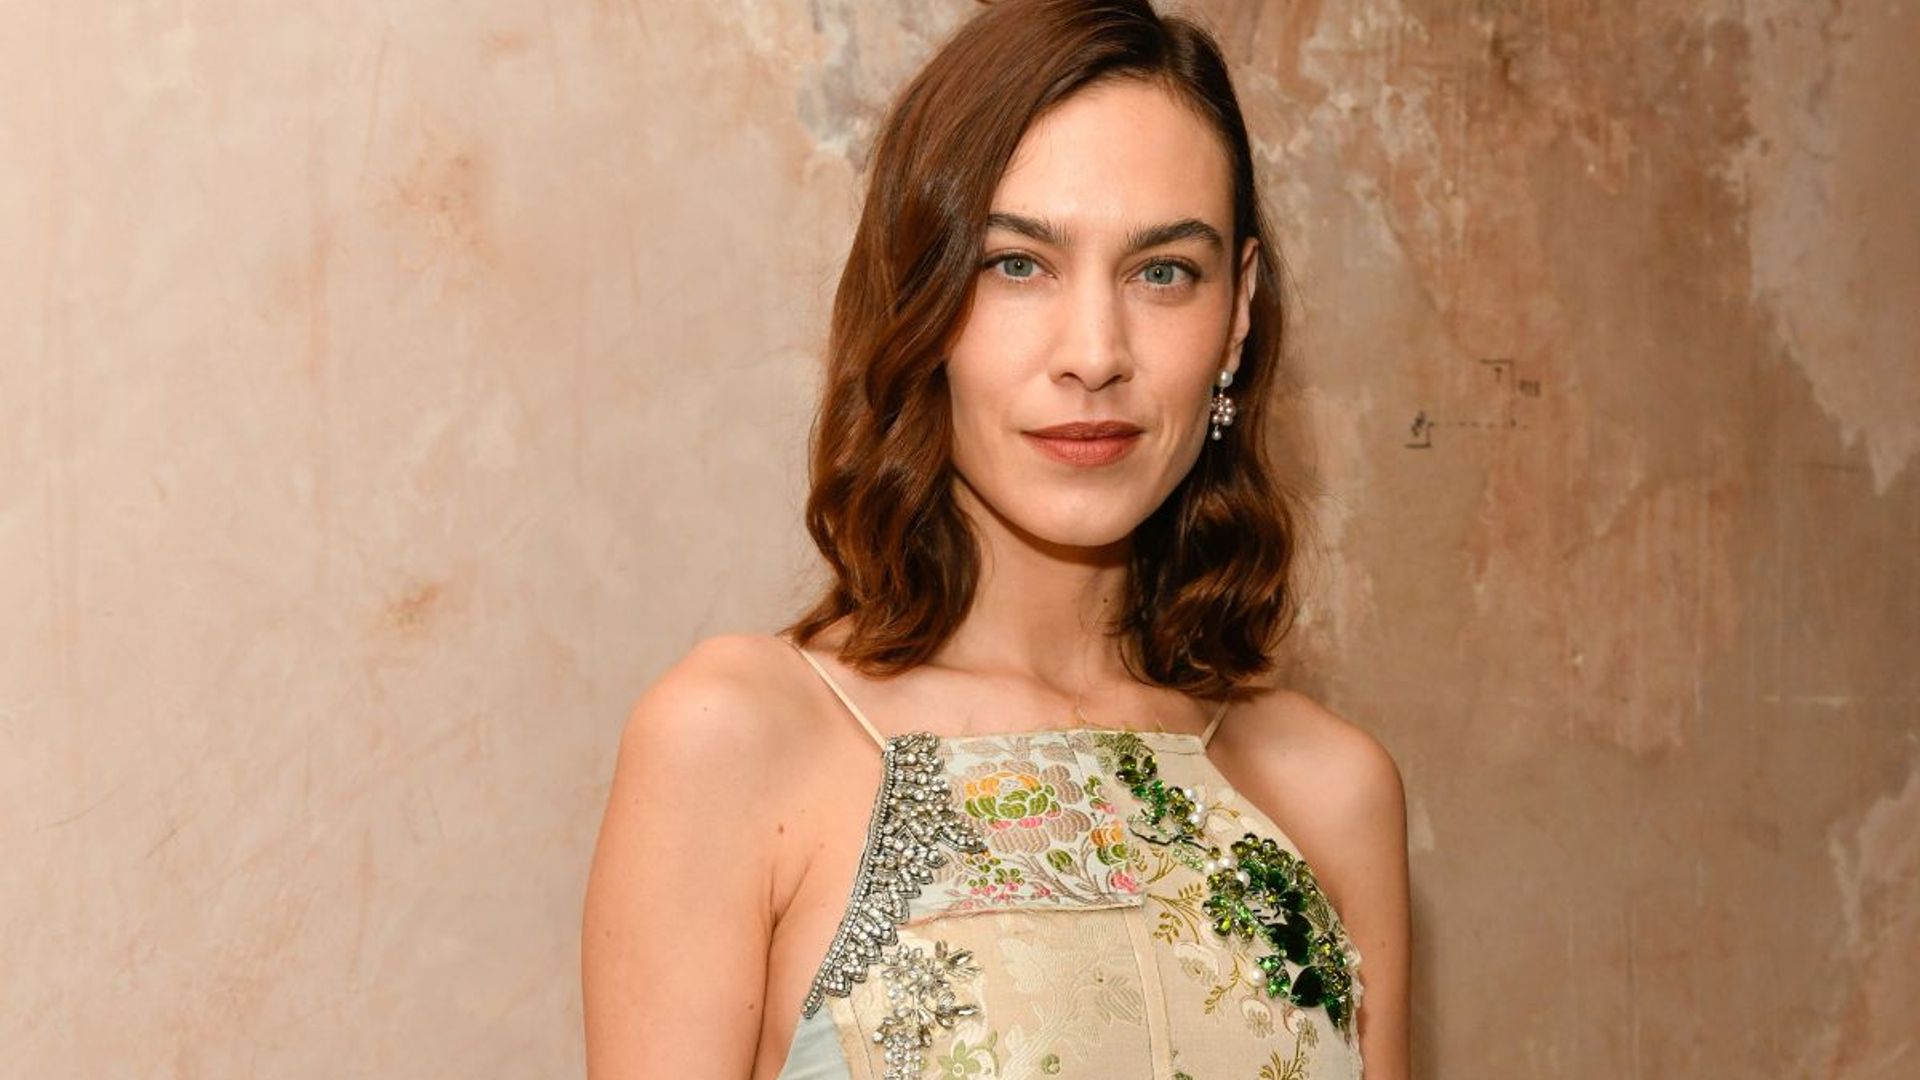 Alexa Chung wears an outfit fit for a modern princess at Erdem’s VIP dinner